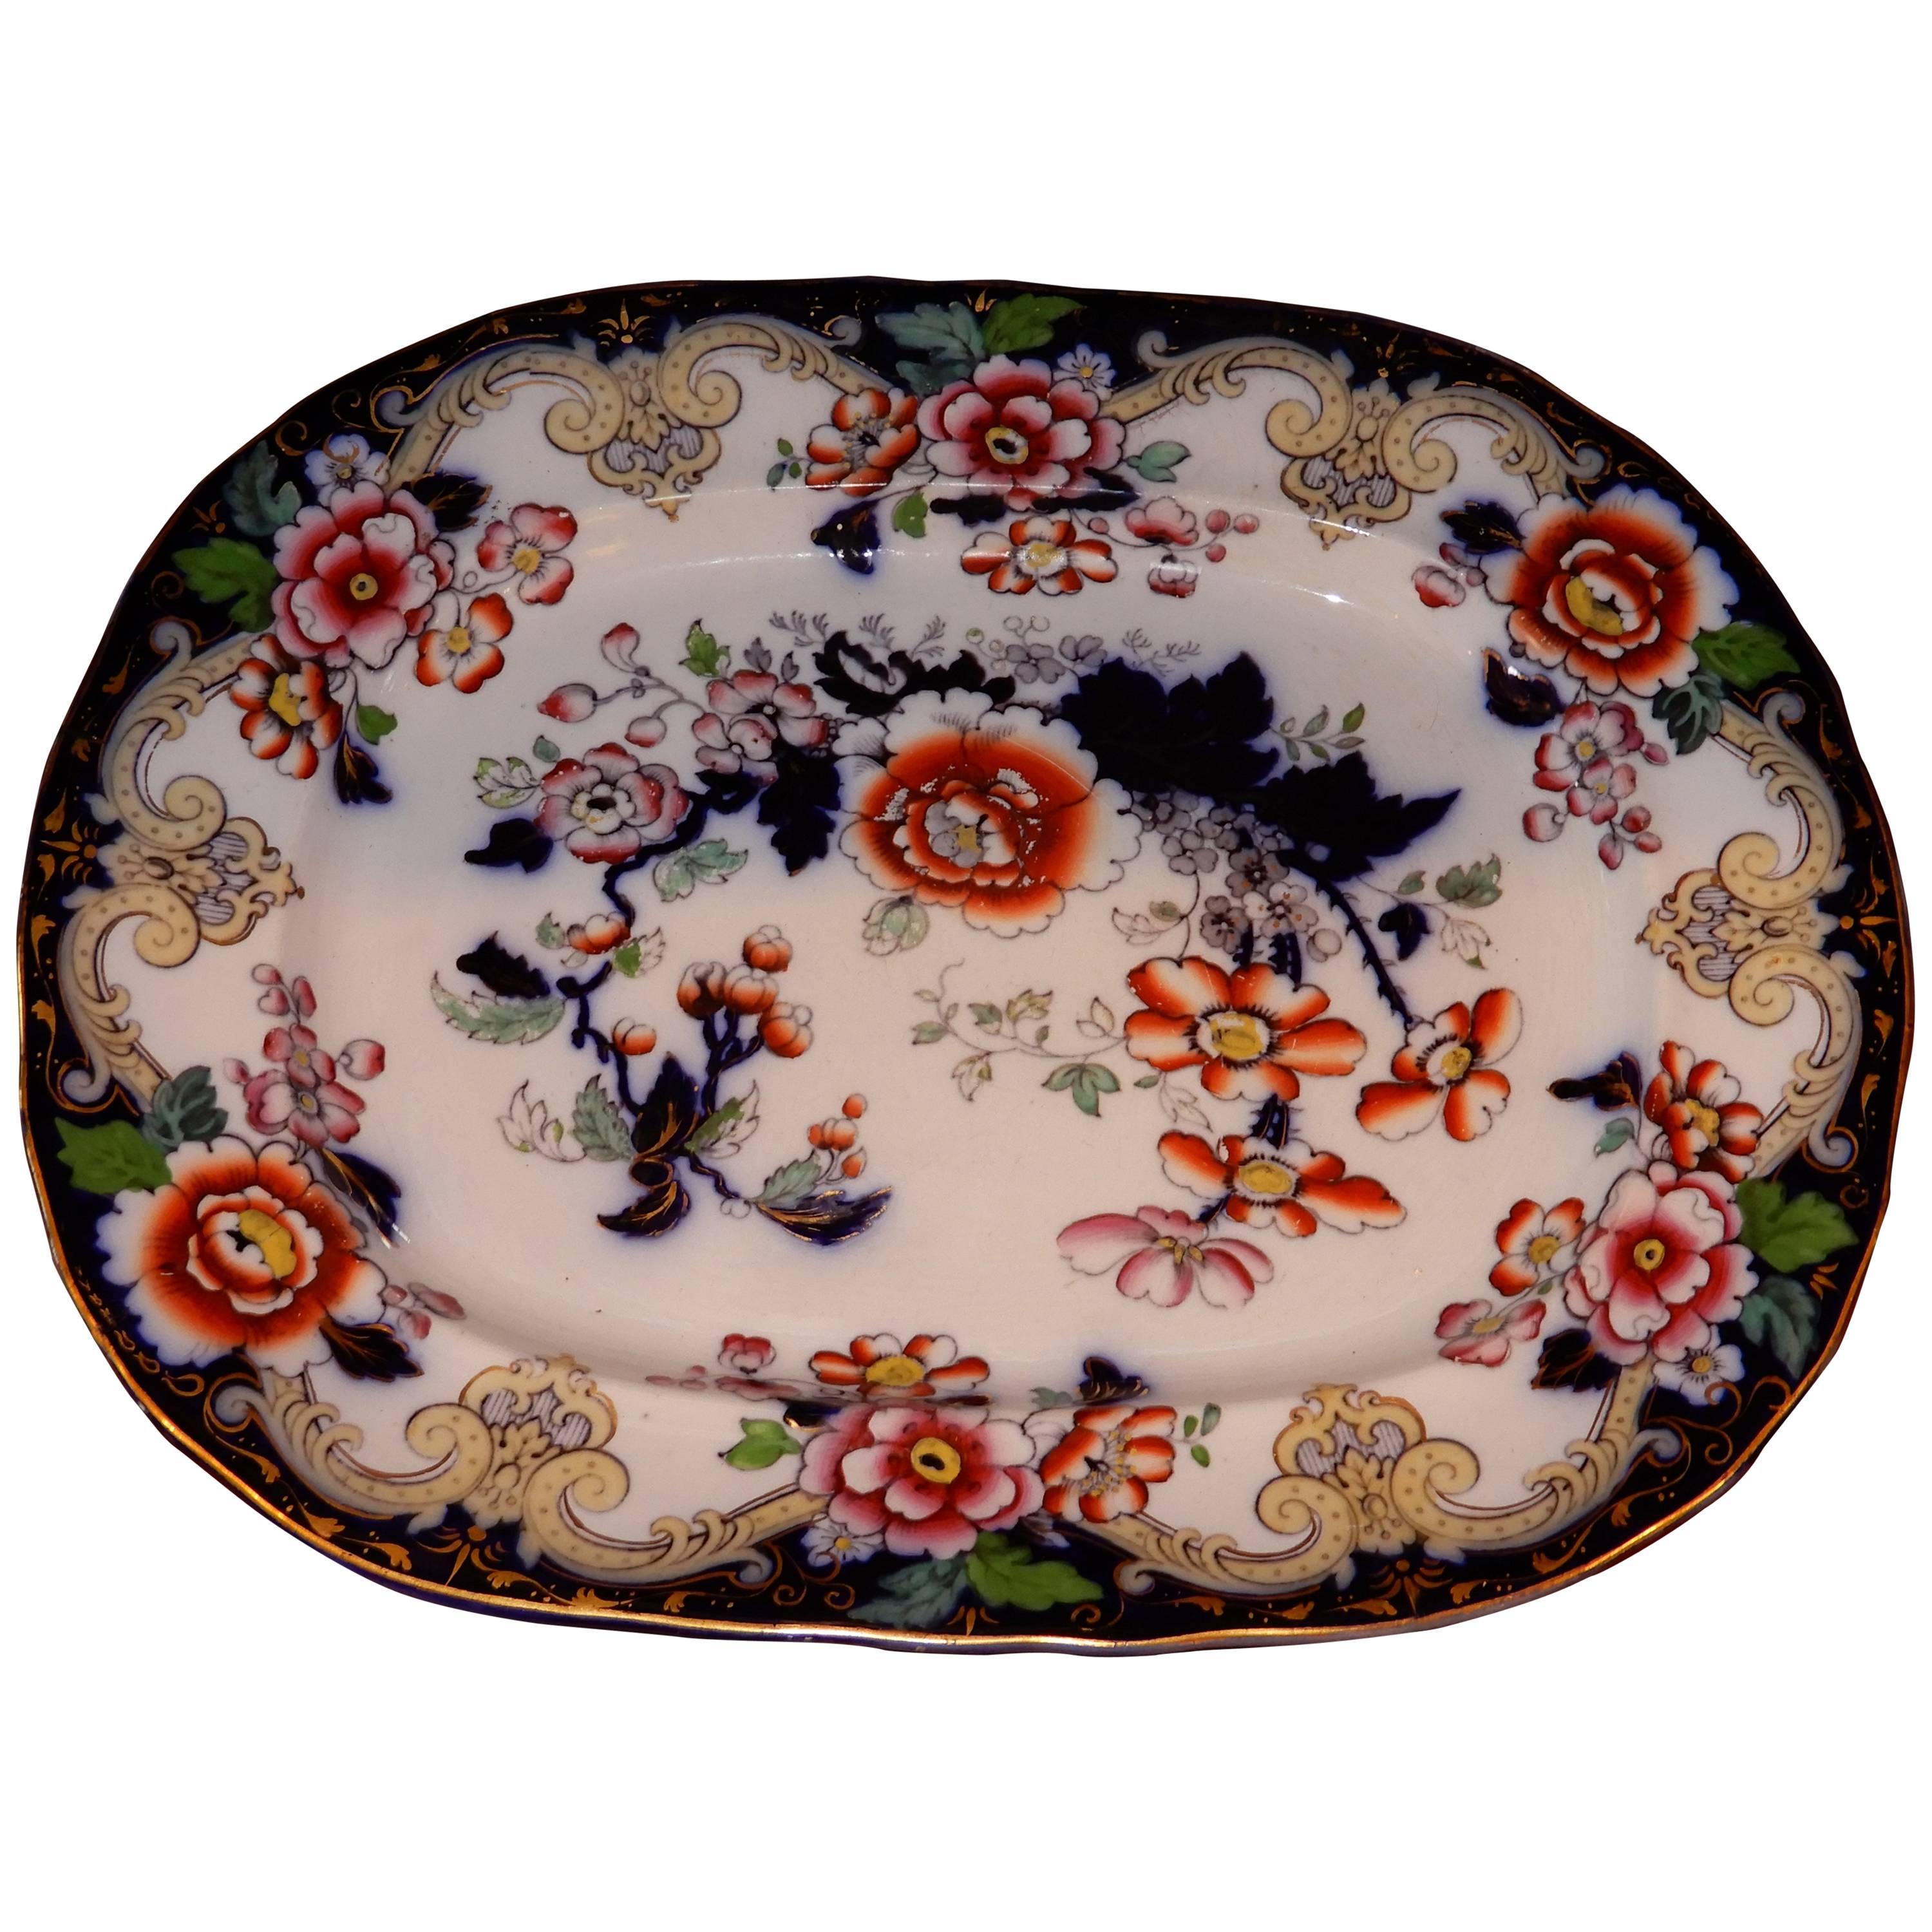 Antique Platter from Charles Meigh and Son of Staffordshire, England, circa 1850